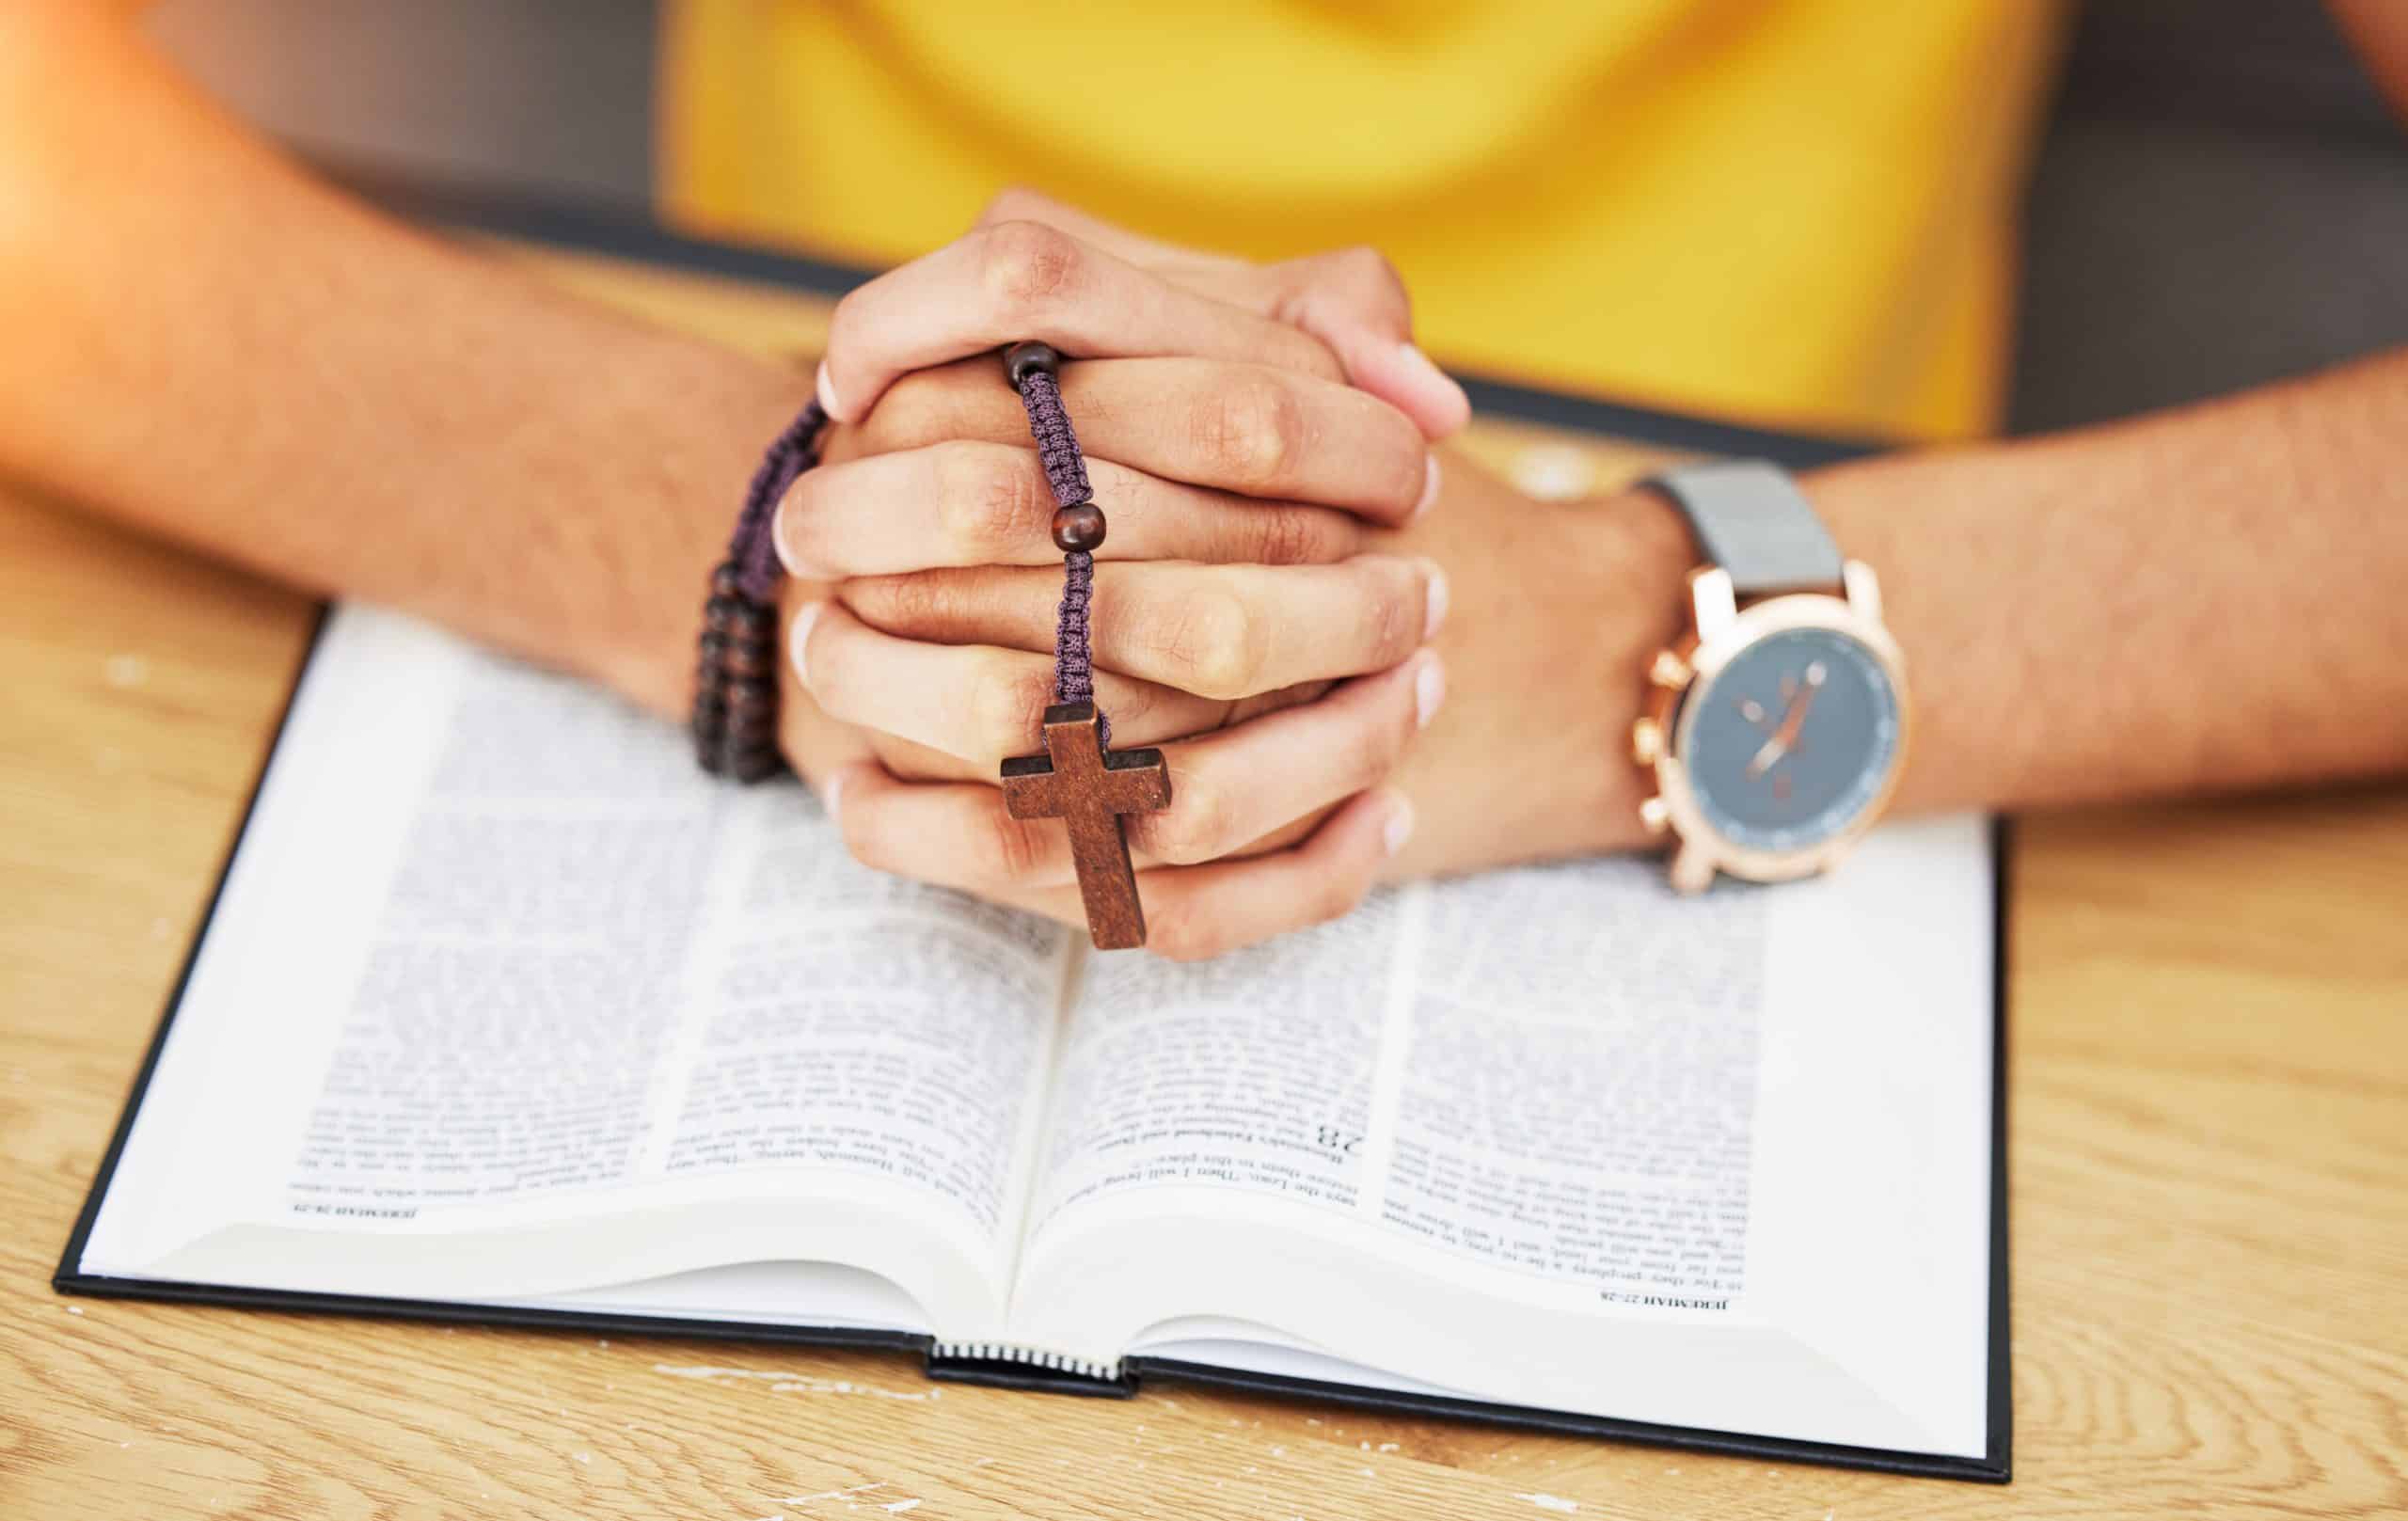 Prayer Peace And Bible With Hands Of Person In Living